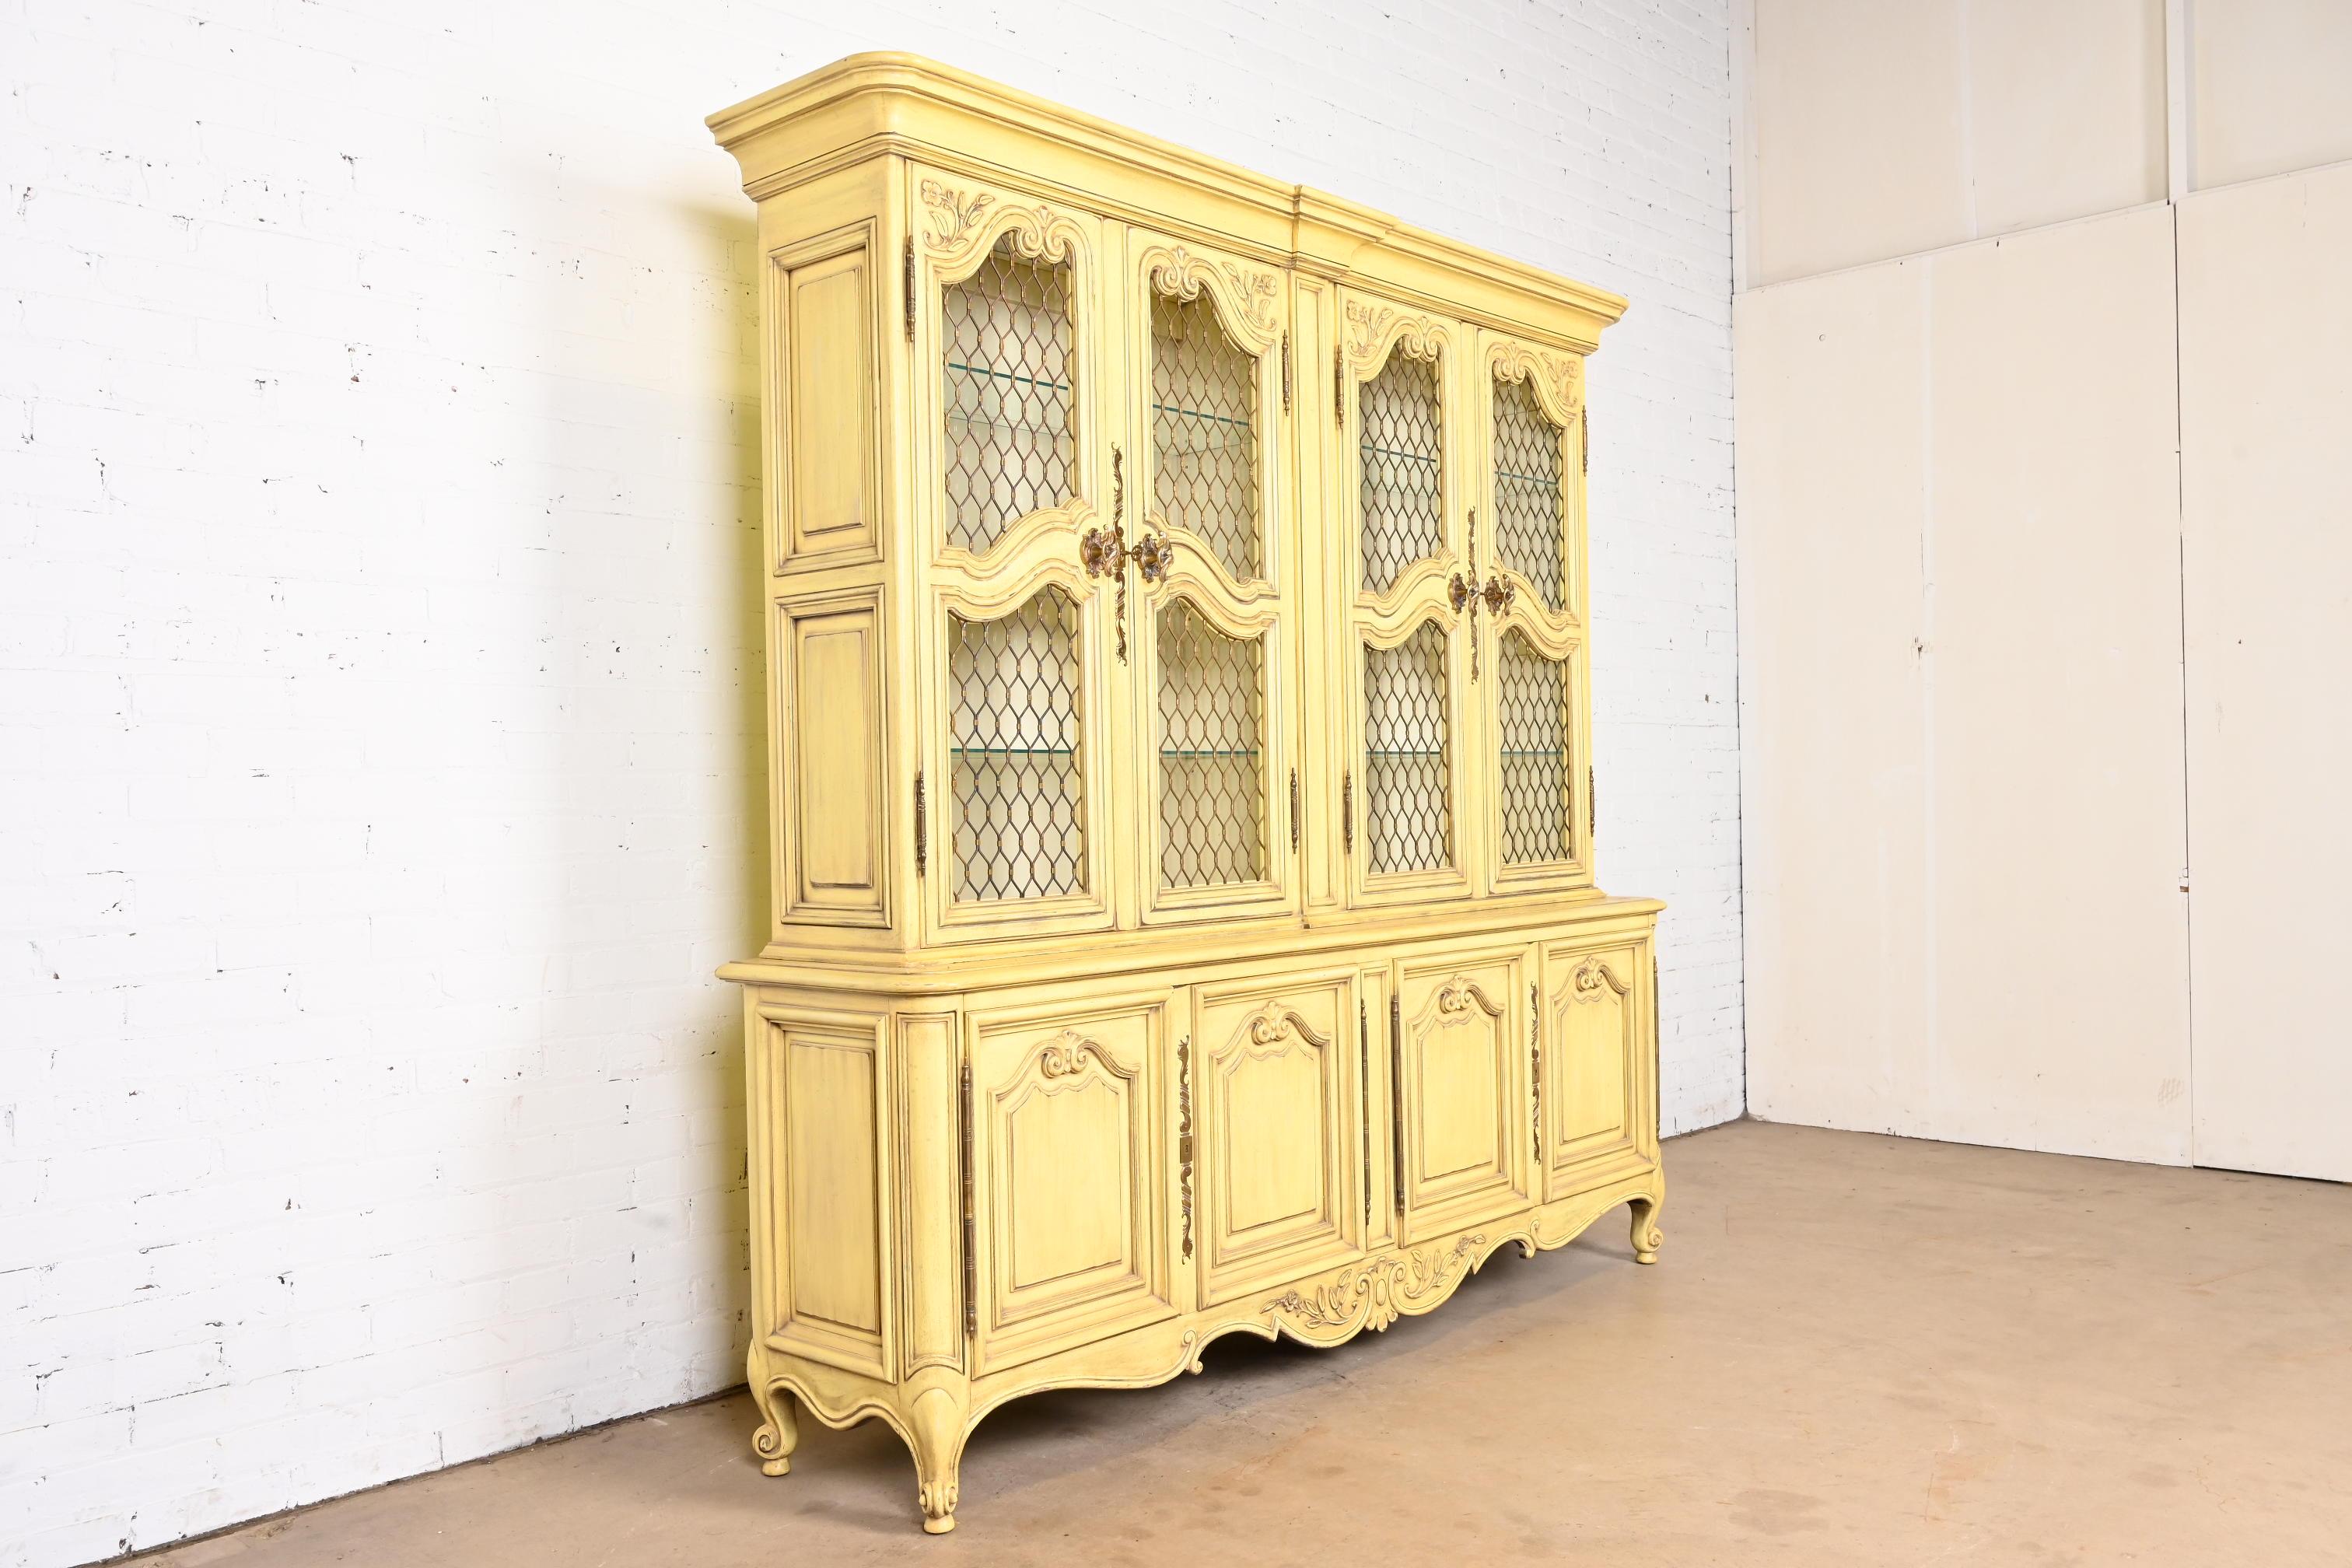 Karges French Provincial Louis XV Cream Lacquered Breakfront Bookcase Cabinet In Good Condition For Sale In South Bend, IN